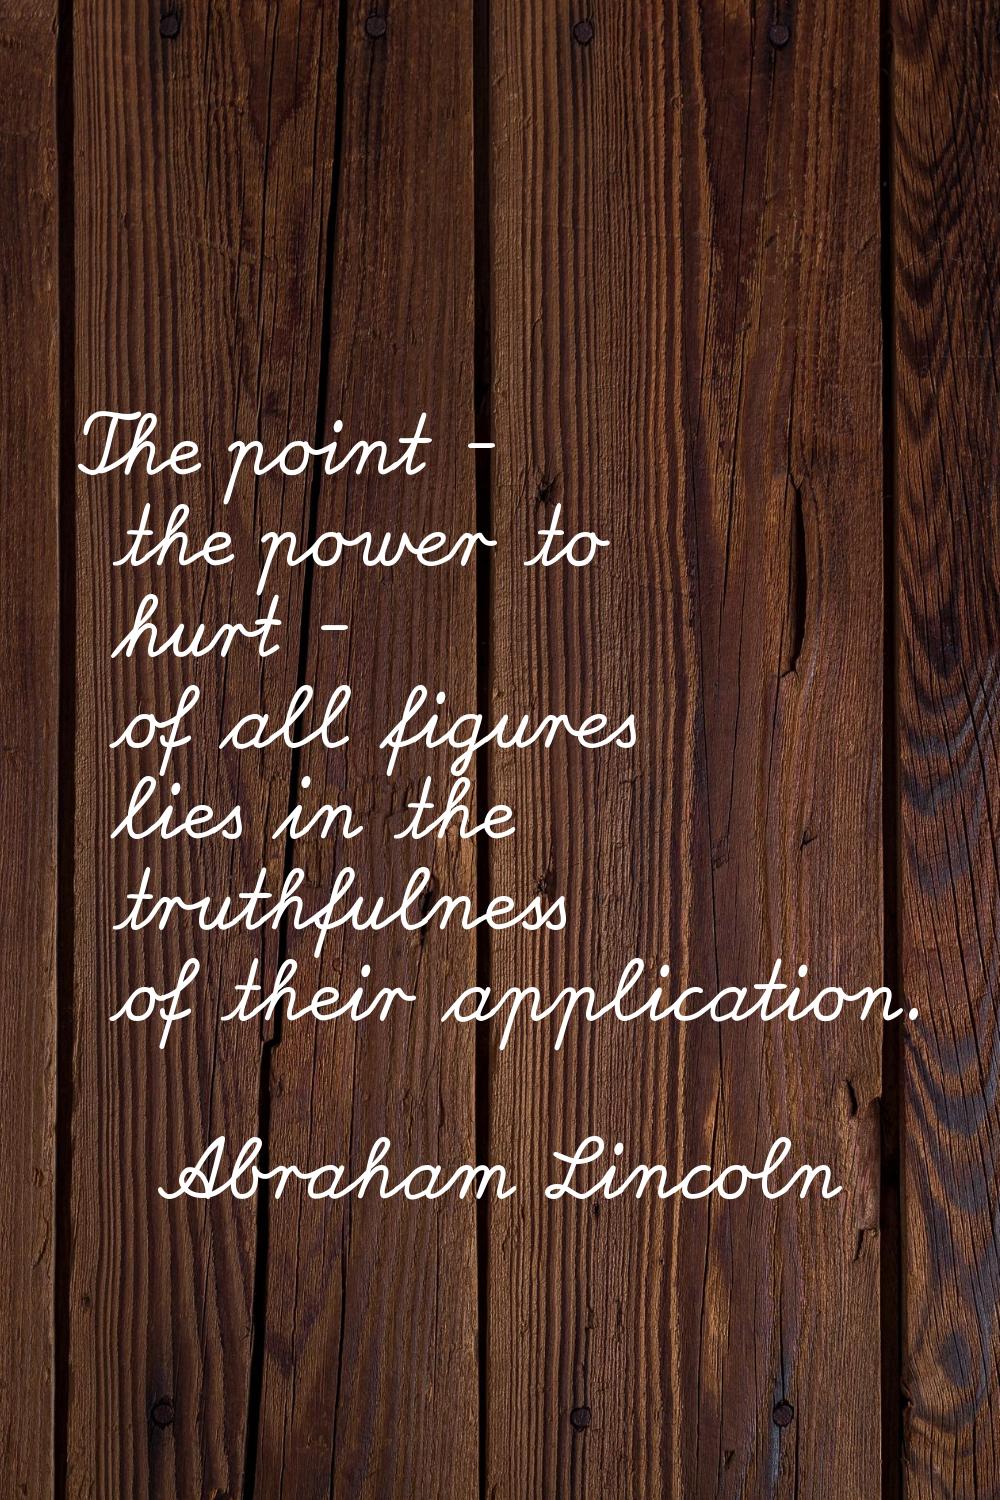 The point - the power to hurt - of all figures lies in the truthfulness of their application.